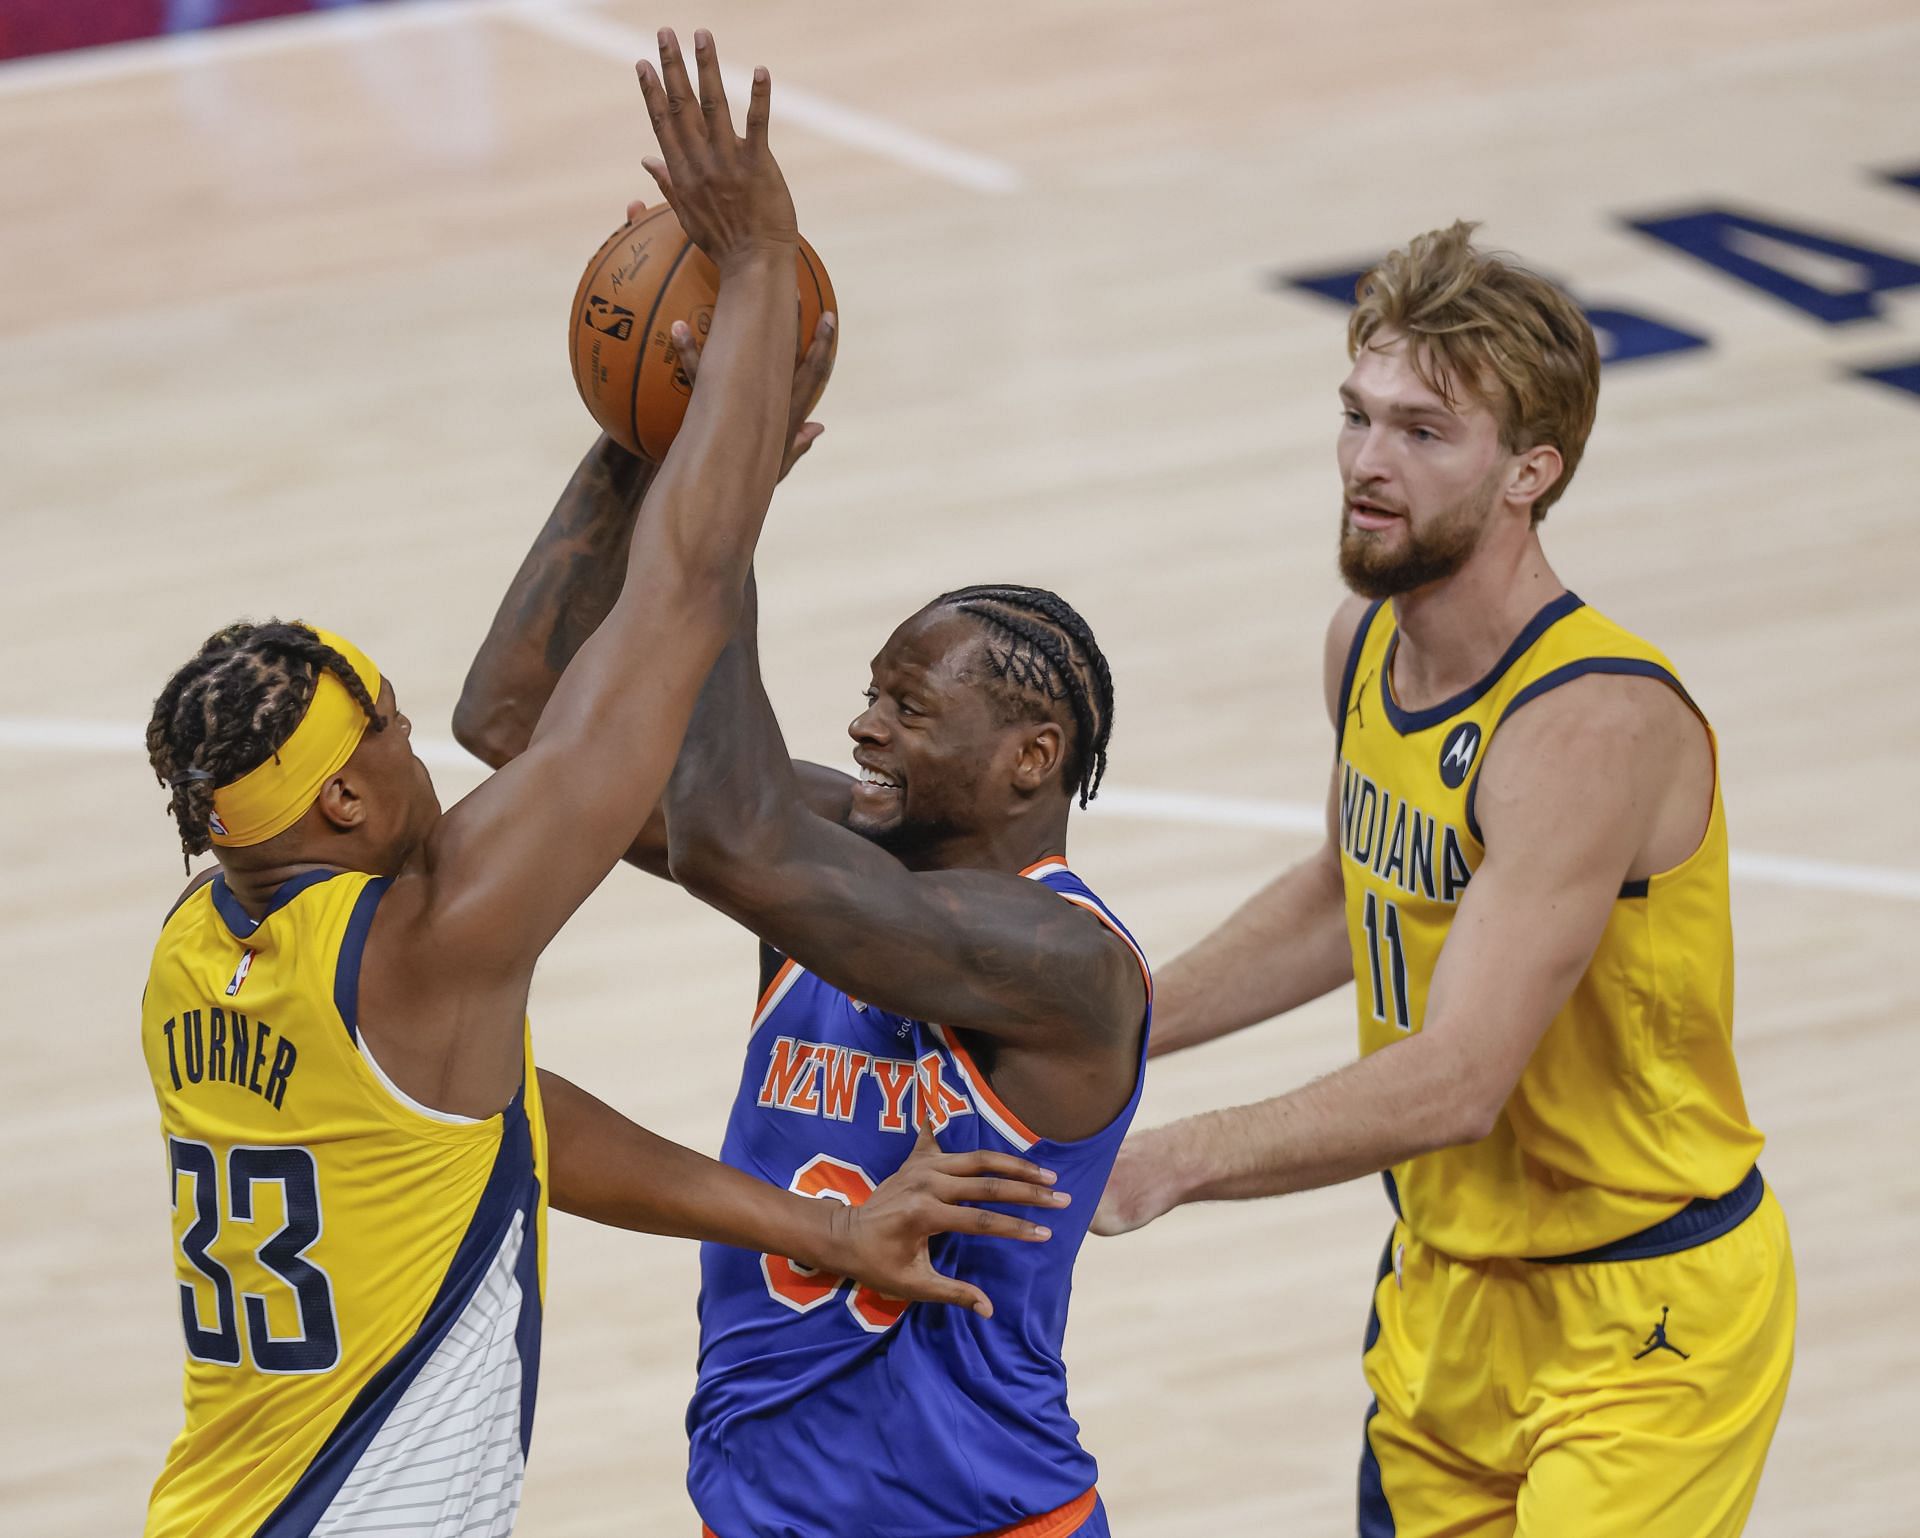 The frontline battle will be worth watching as the New York Knicks visit the Indiana Pacers on Wednesday